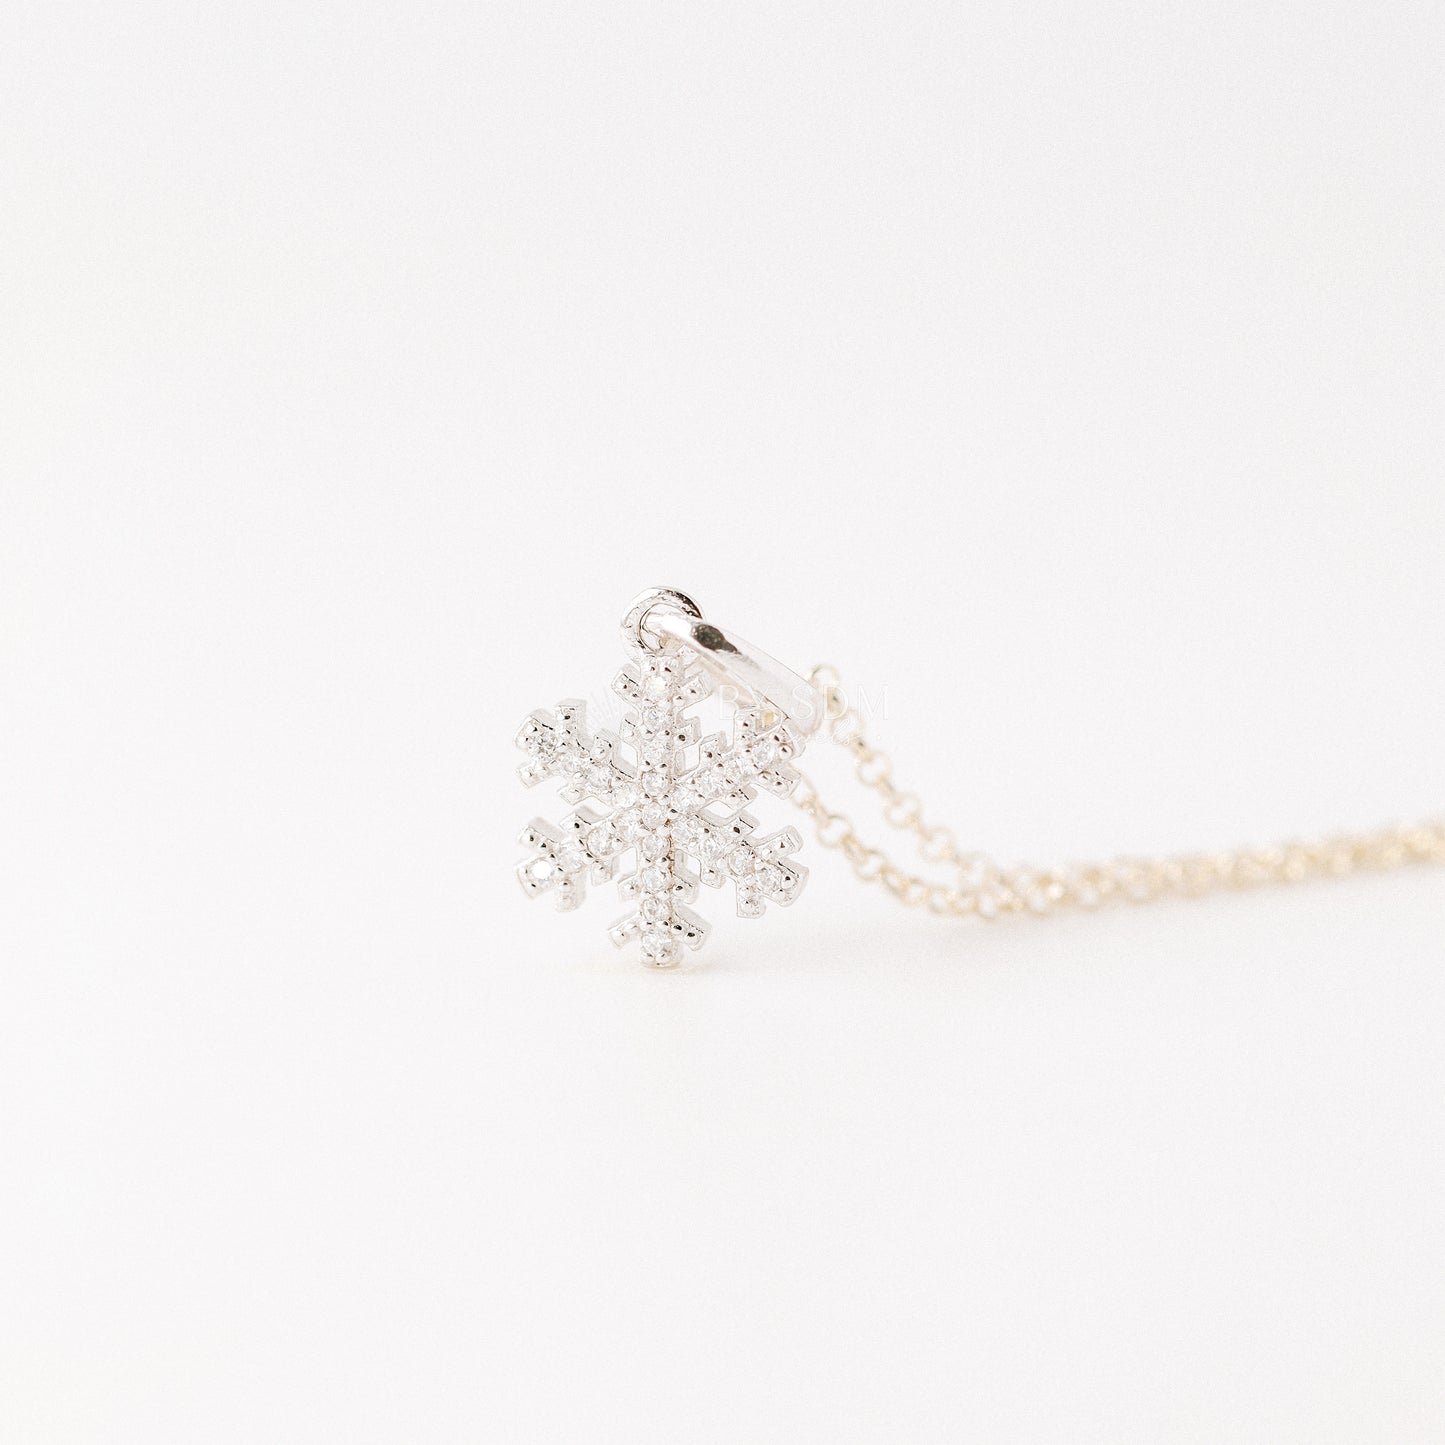 Silver Snowflake Necklace • Dainty Snowflake • Winter Necklace • Snow Necklace • Minimalist Cute Holiday Jewelry for Her